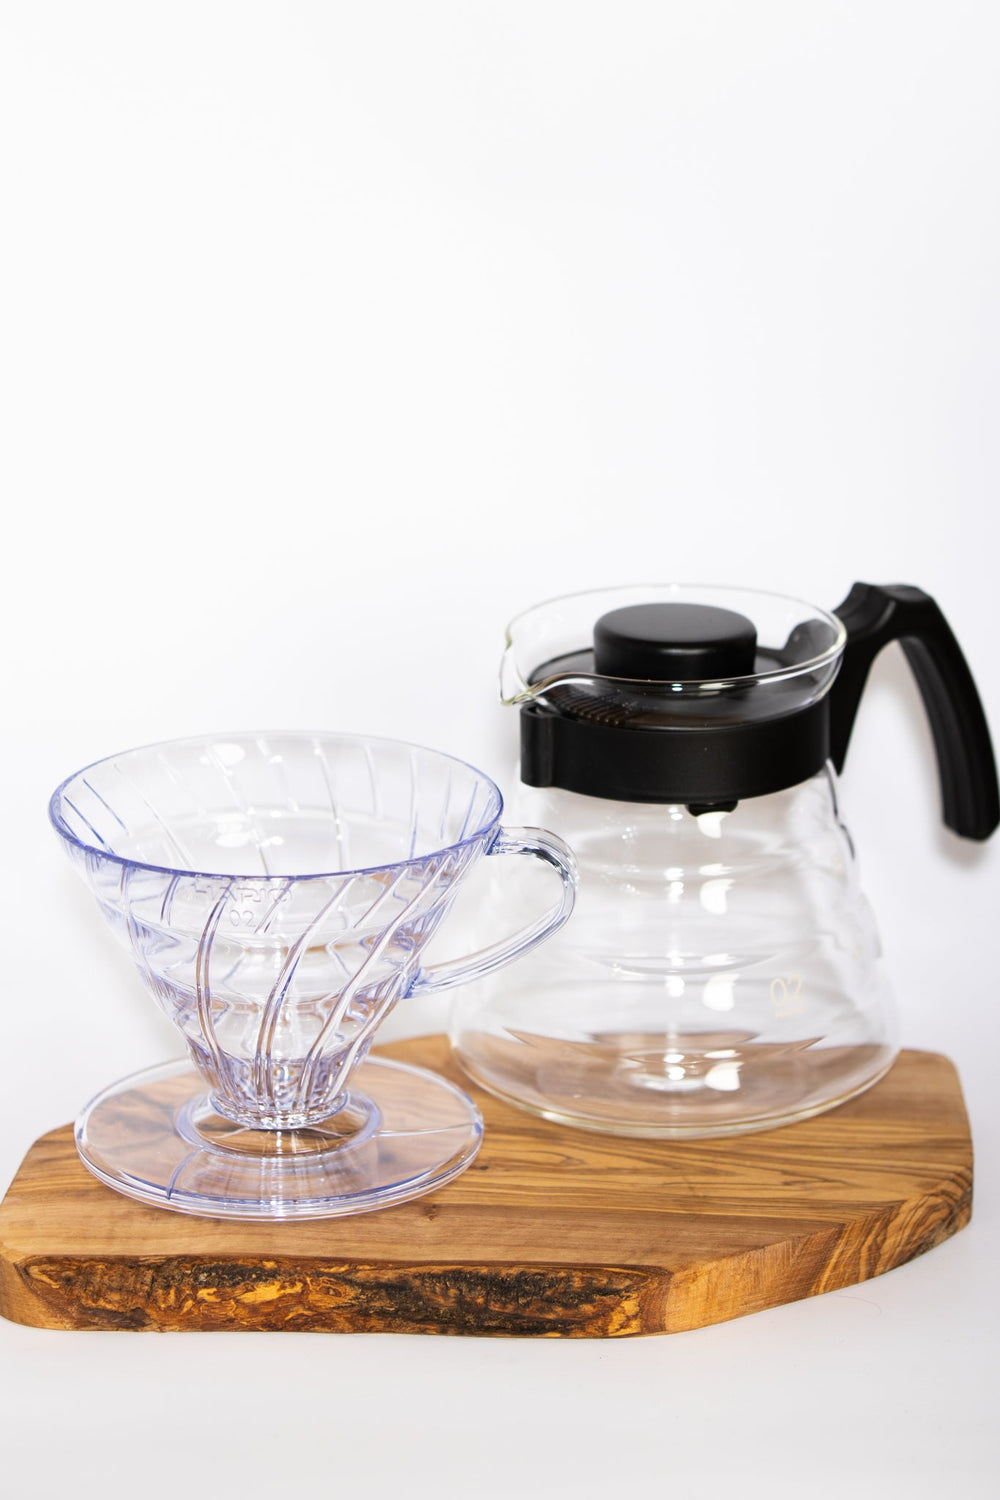 Hario V60 "Craft Coffee Maker" Pour Over Set - Black - Be Good Coffee Co.